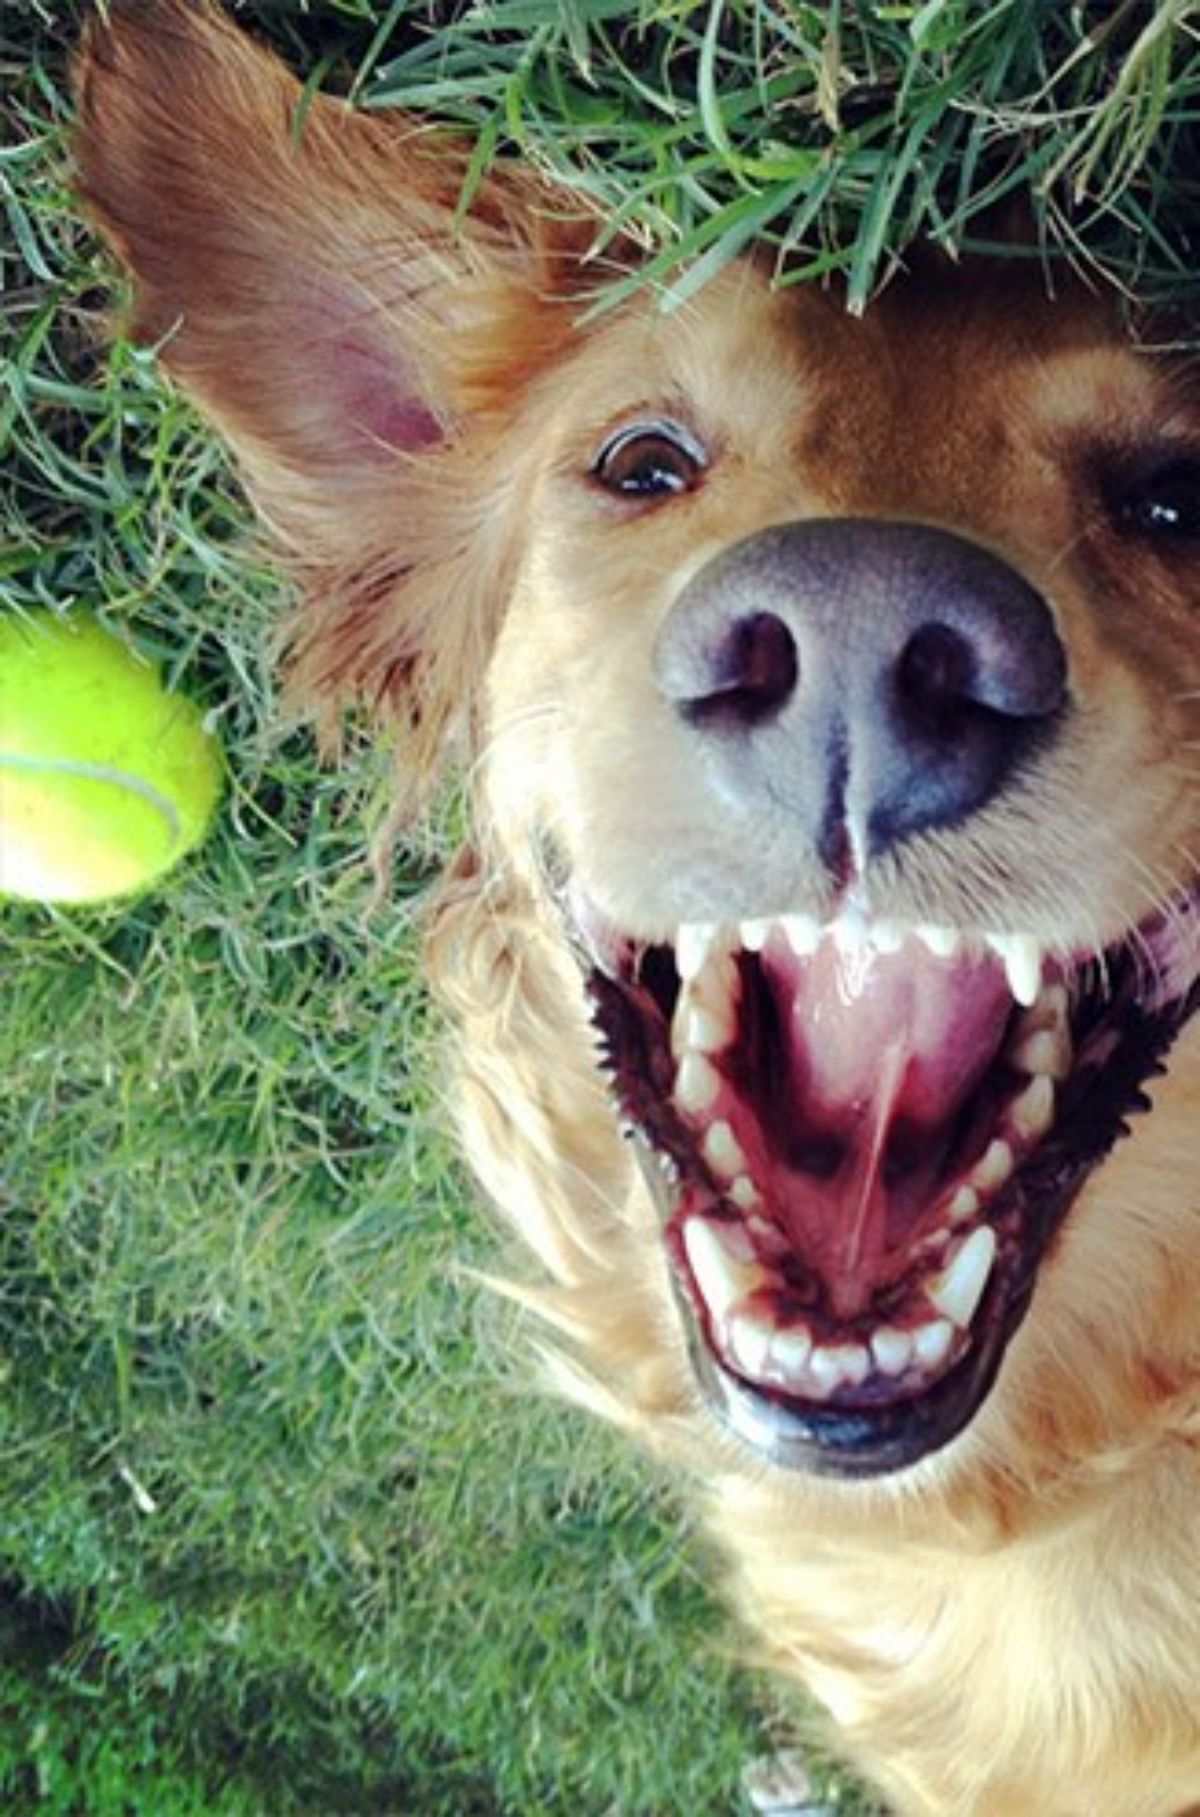 smiling golden retriever laying belly up on grass with a yellow tennis ball next to the face